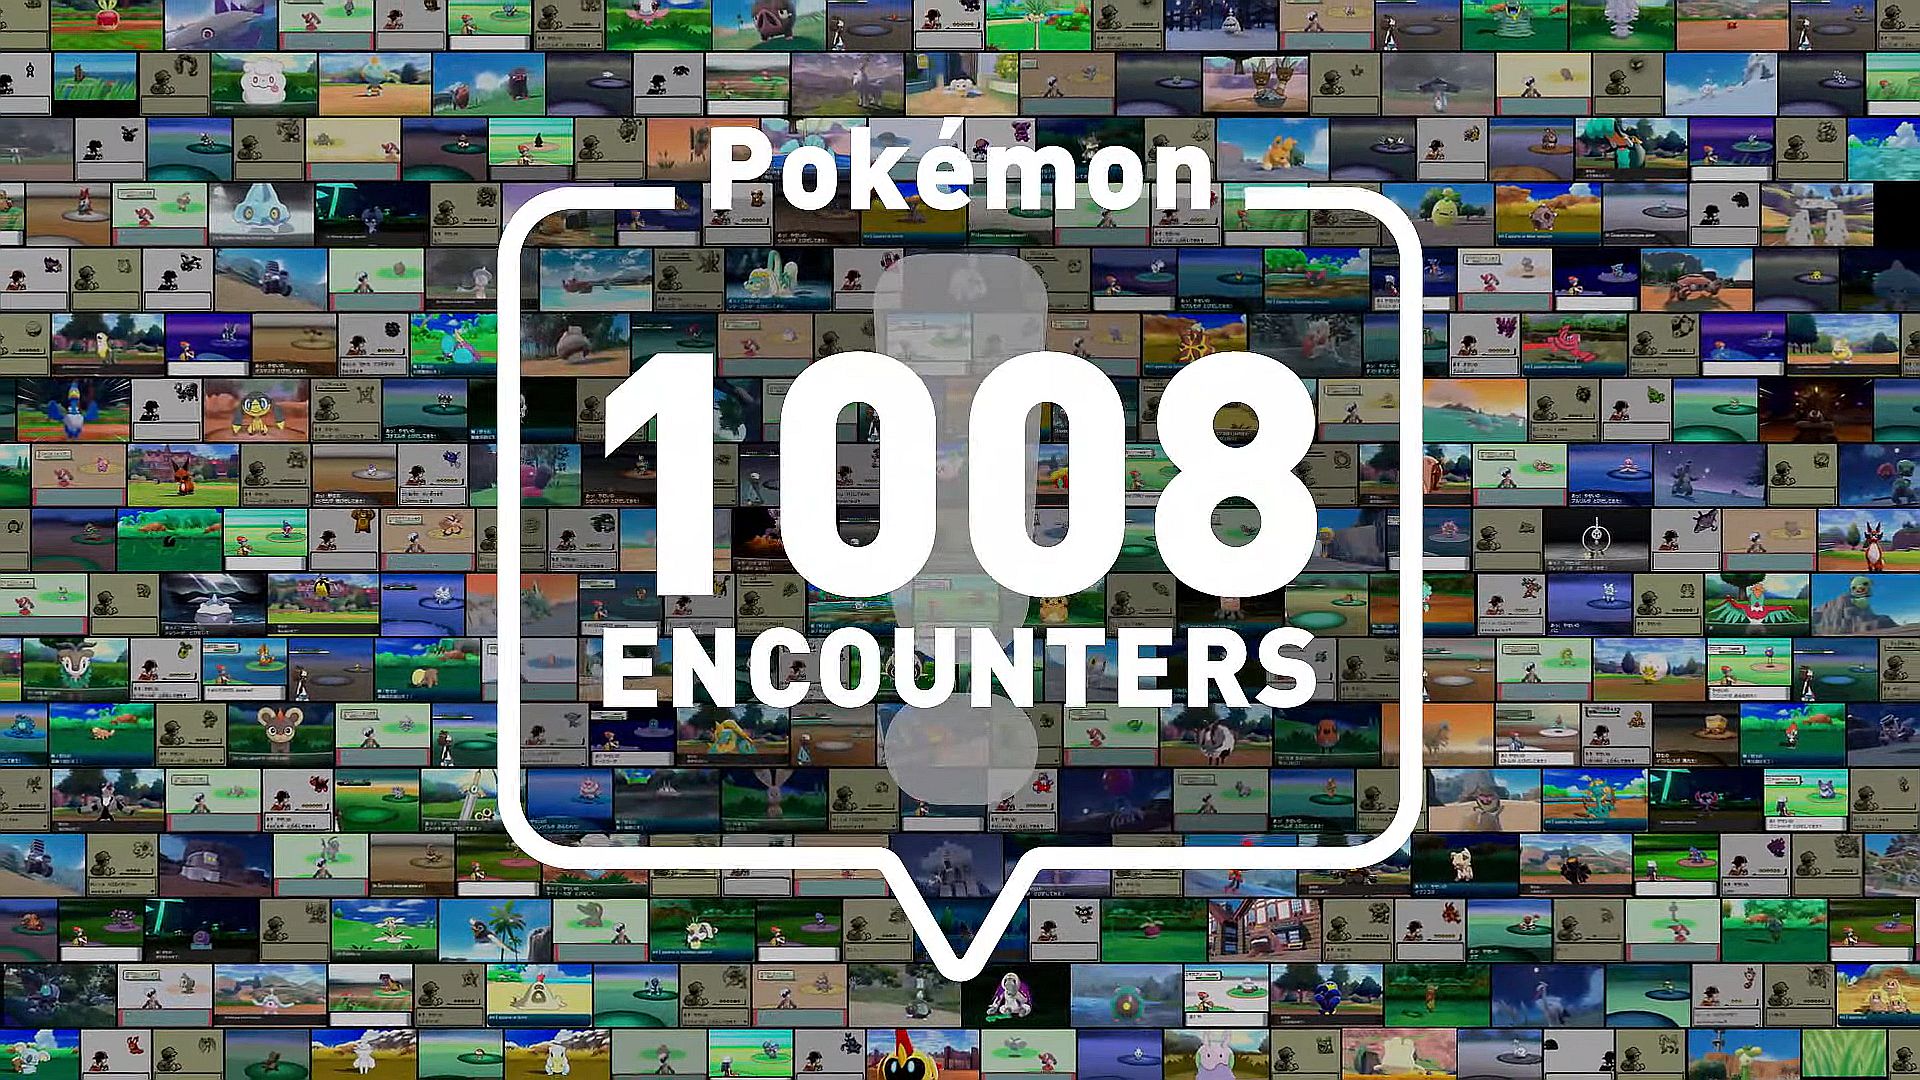 There are now 1008 Pokemon in the wild